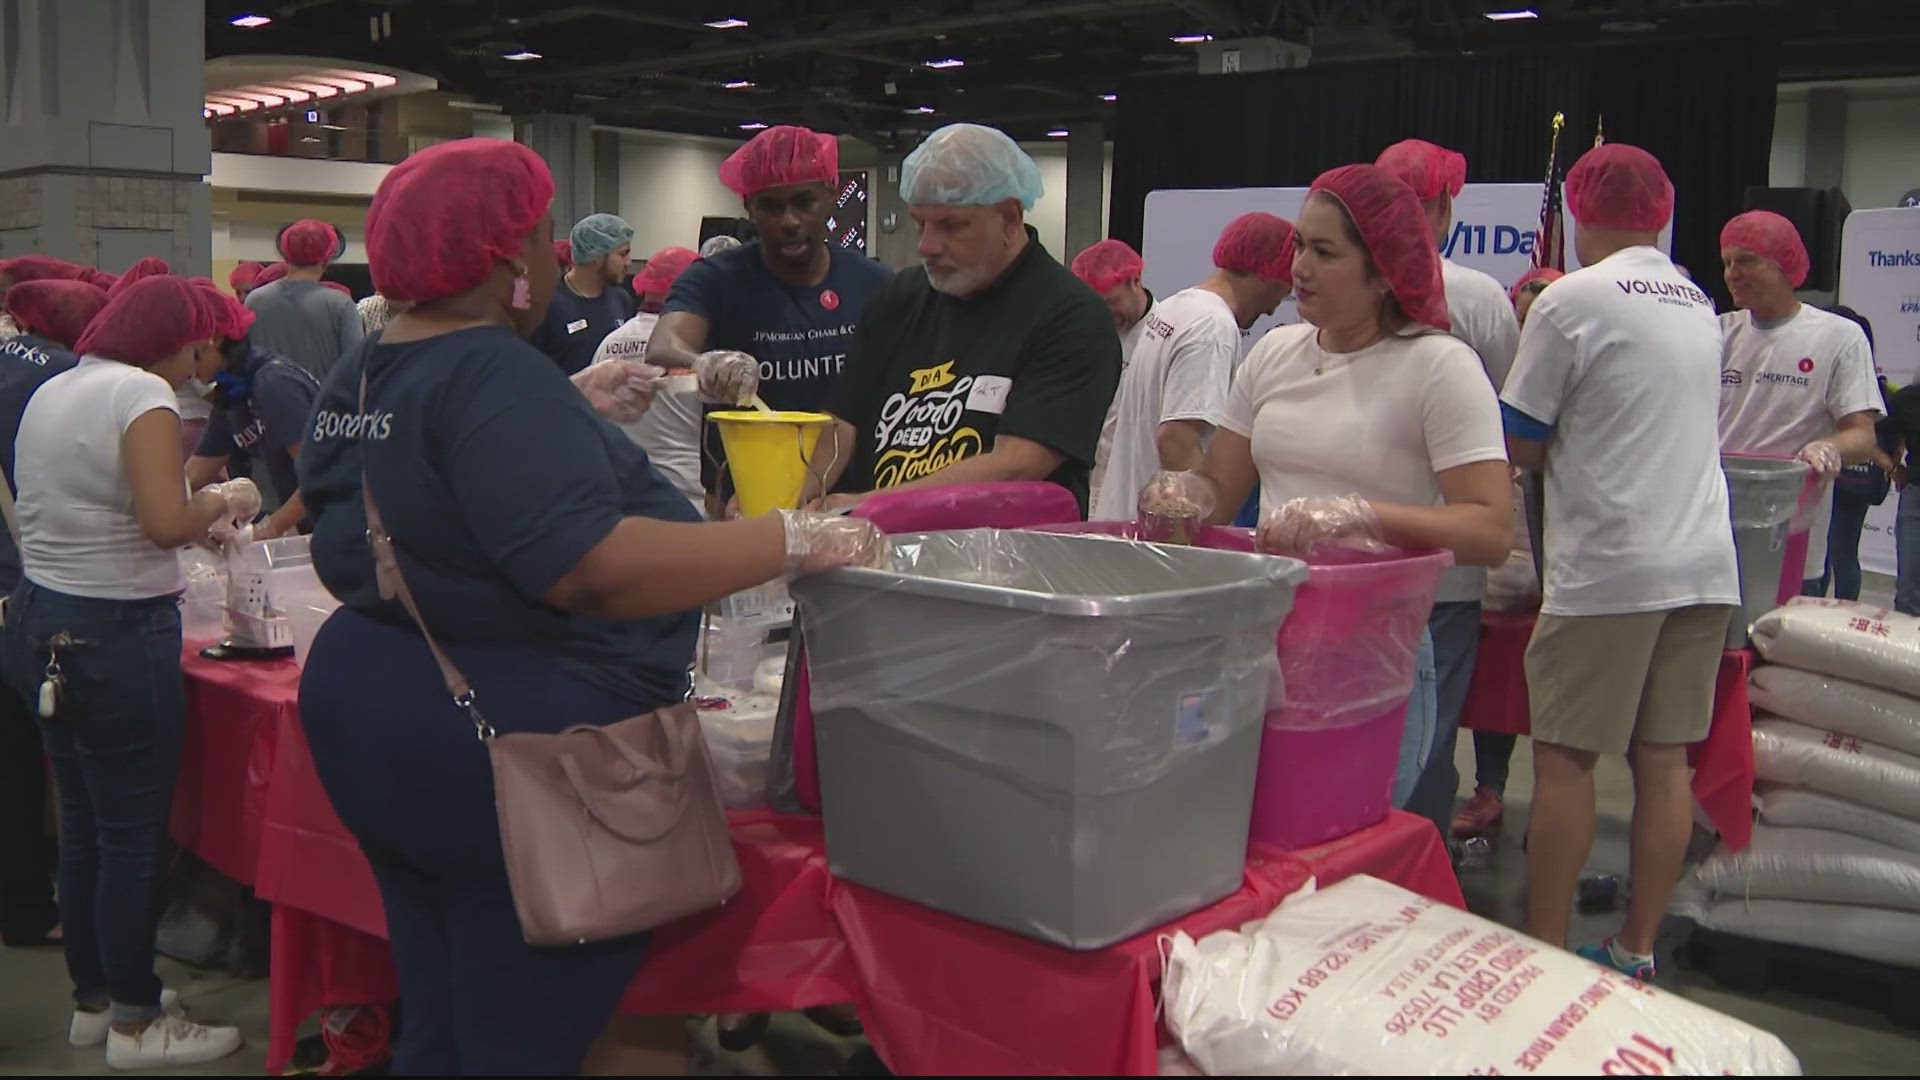 Neighbors packed more than 300,000 meals for those in need on the 22nd anniversary of Sept. 11.